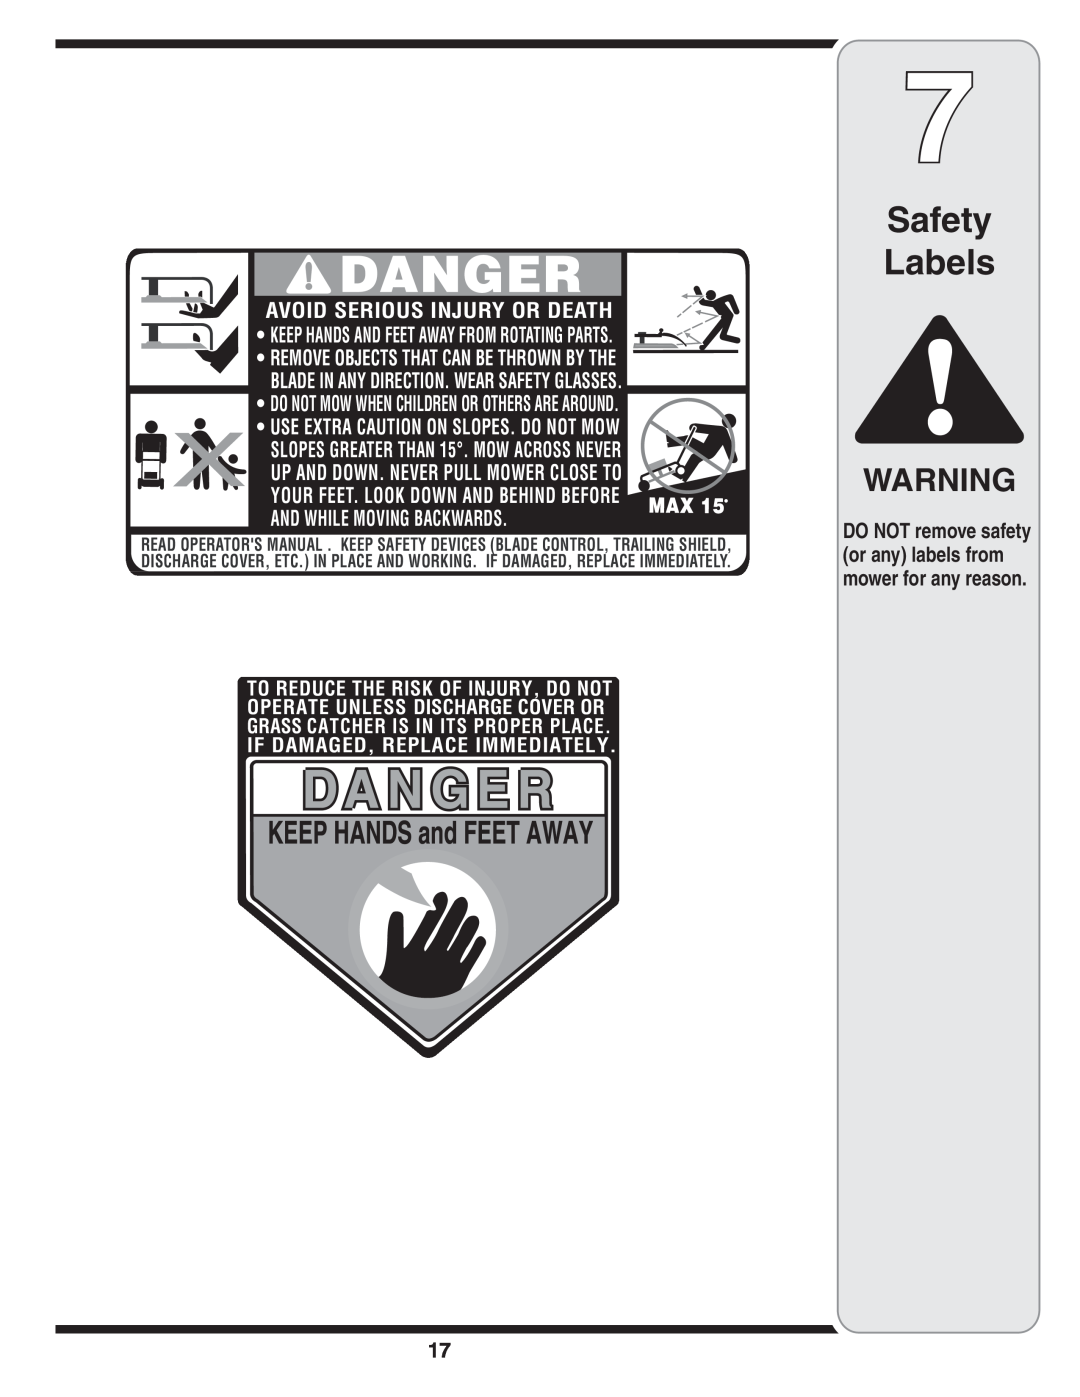 MTD 38 warranty Safety Labels, DO NOT remove safety or any labels from mower for any reason 